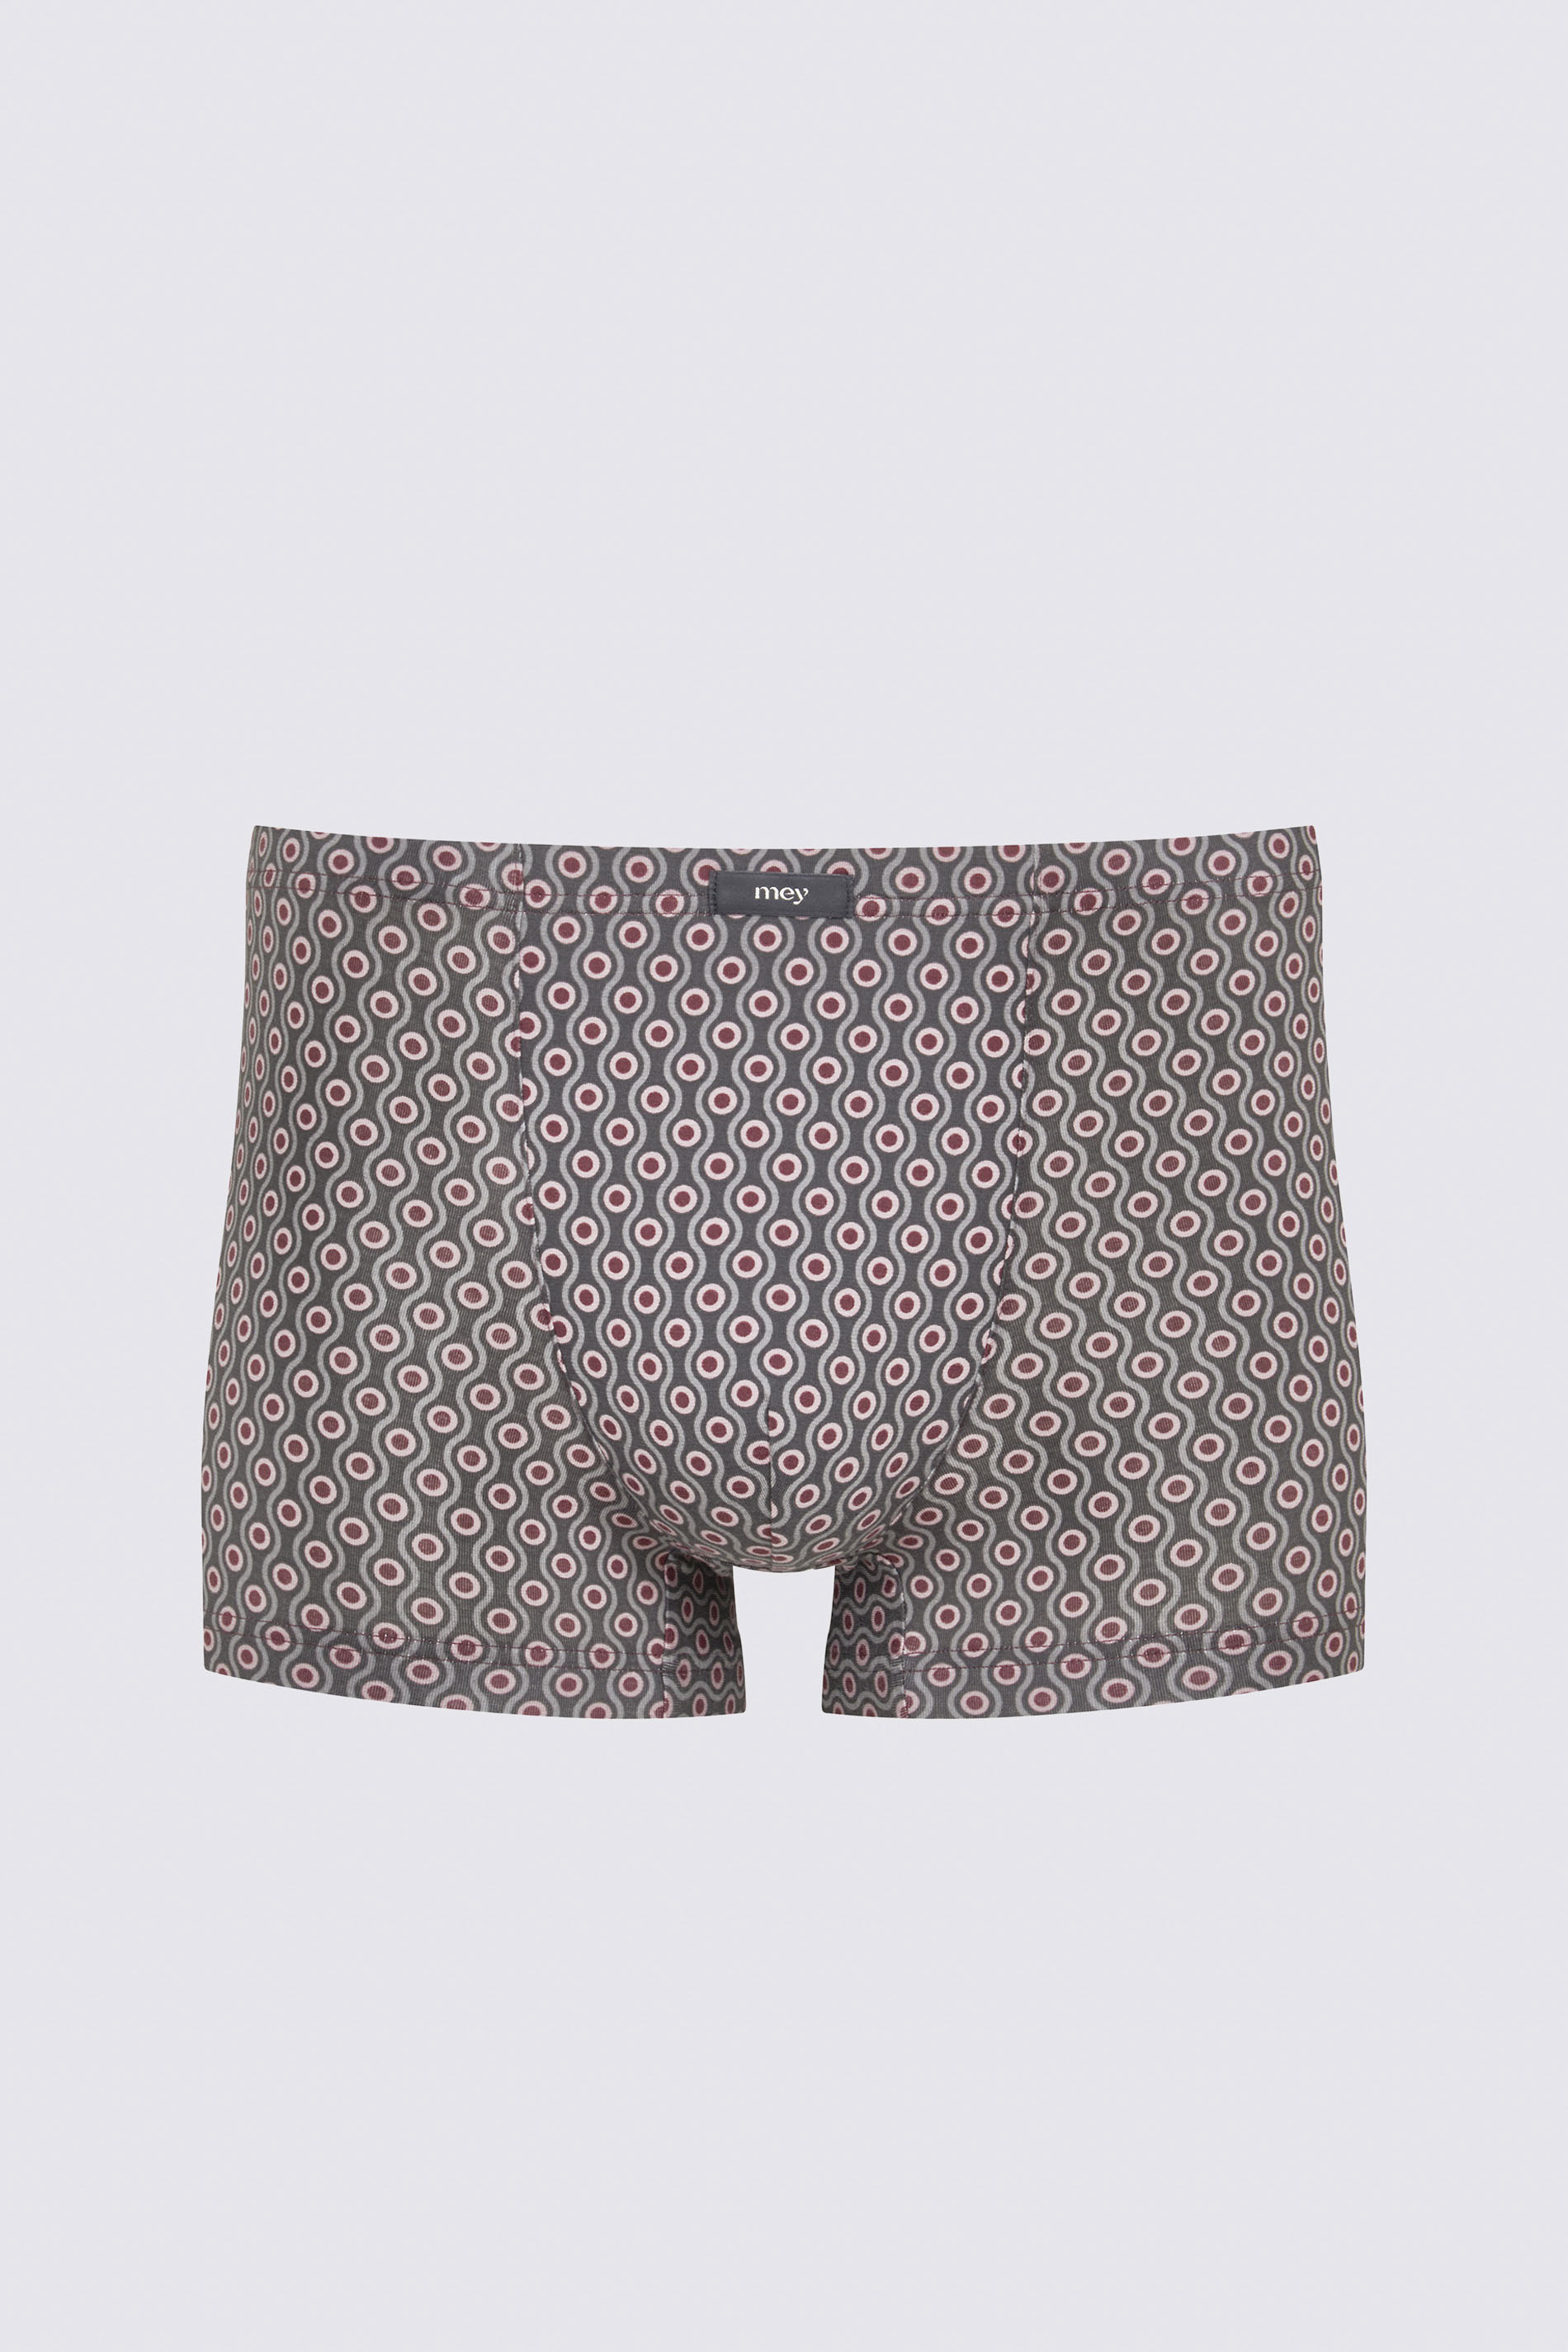 Shorty Oxblood Serie 4 Col Dots Uitknippen | mey®